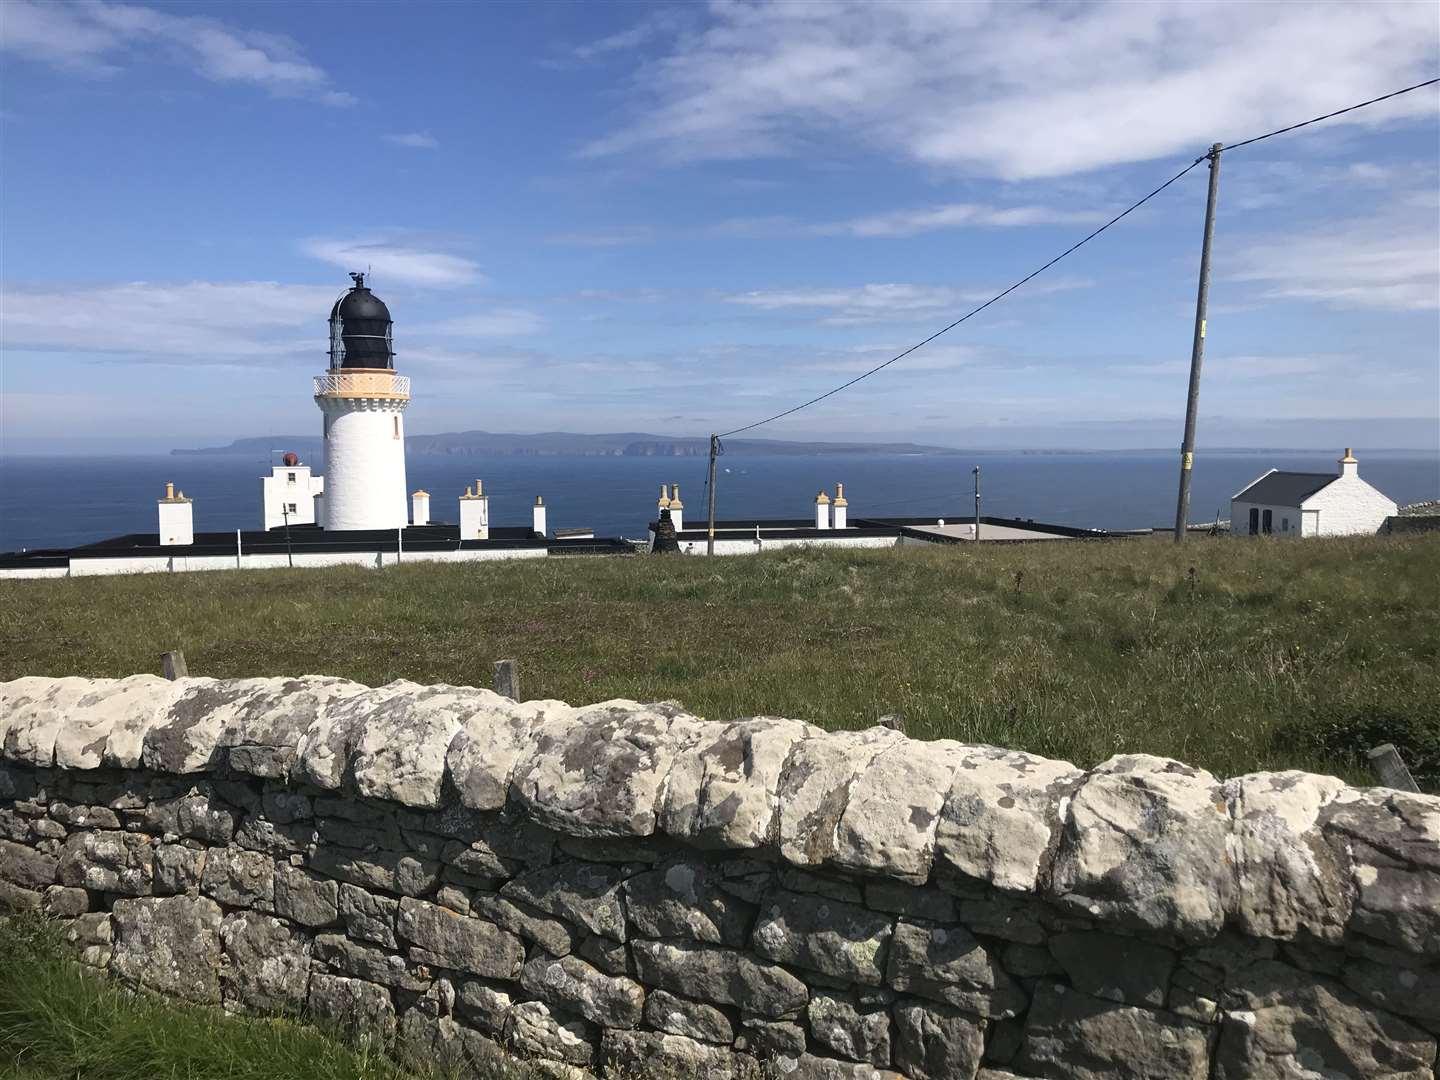 Dunnet Head was one of the compass points Jamie was keen to reach on his trip.